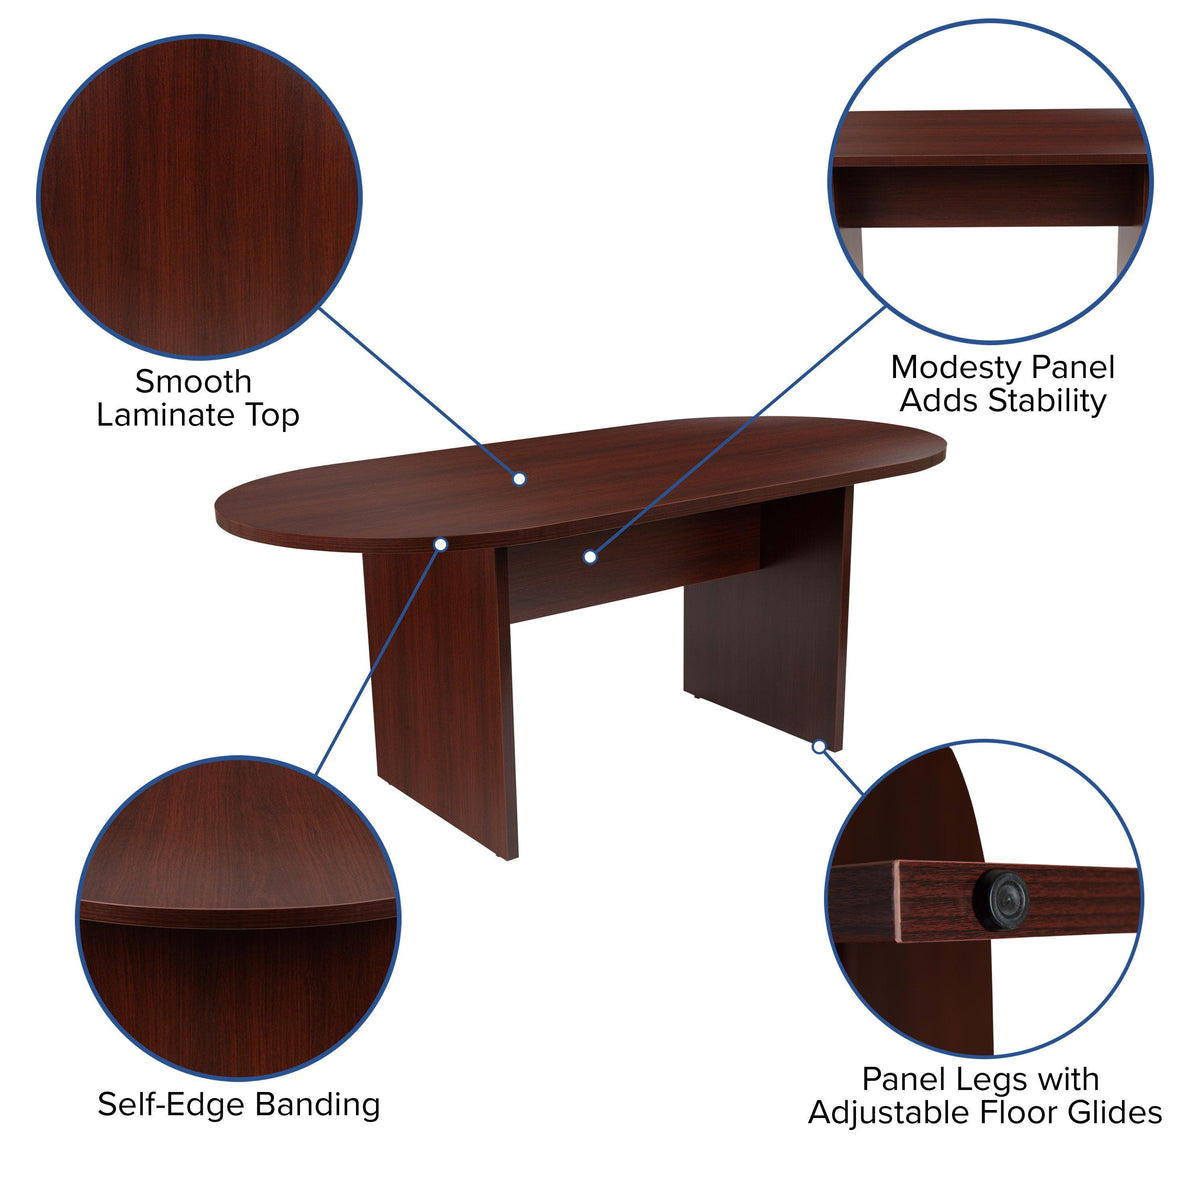 Mahogany |#| 5 Piece Mahogany Oval Conference Table with 4 Black LeatherSoft-Padded Chairs